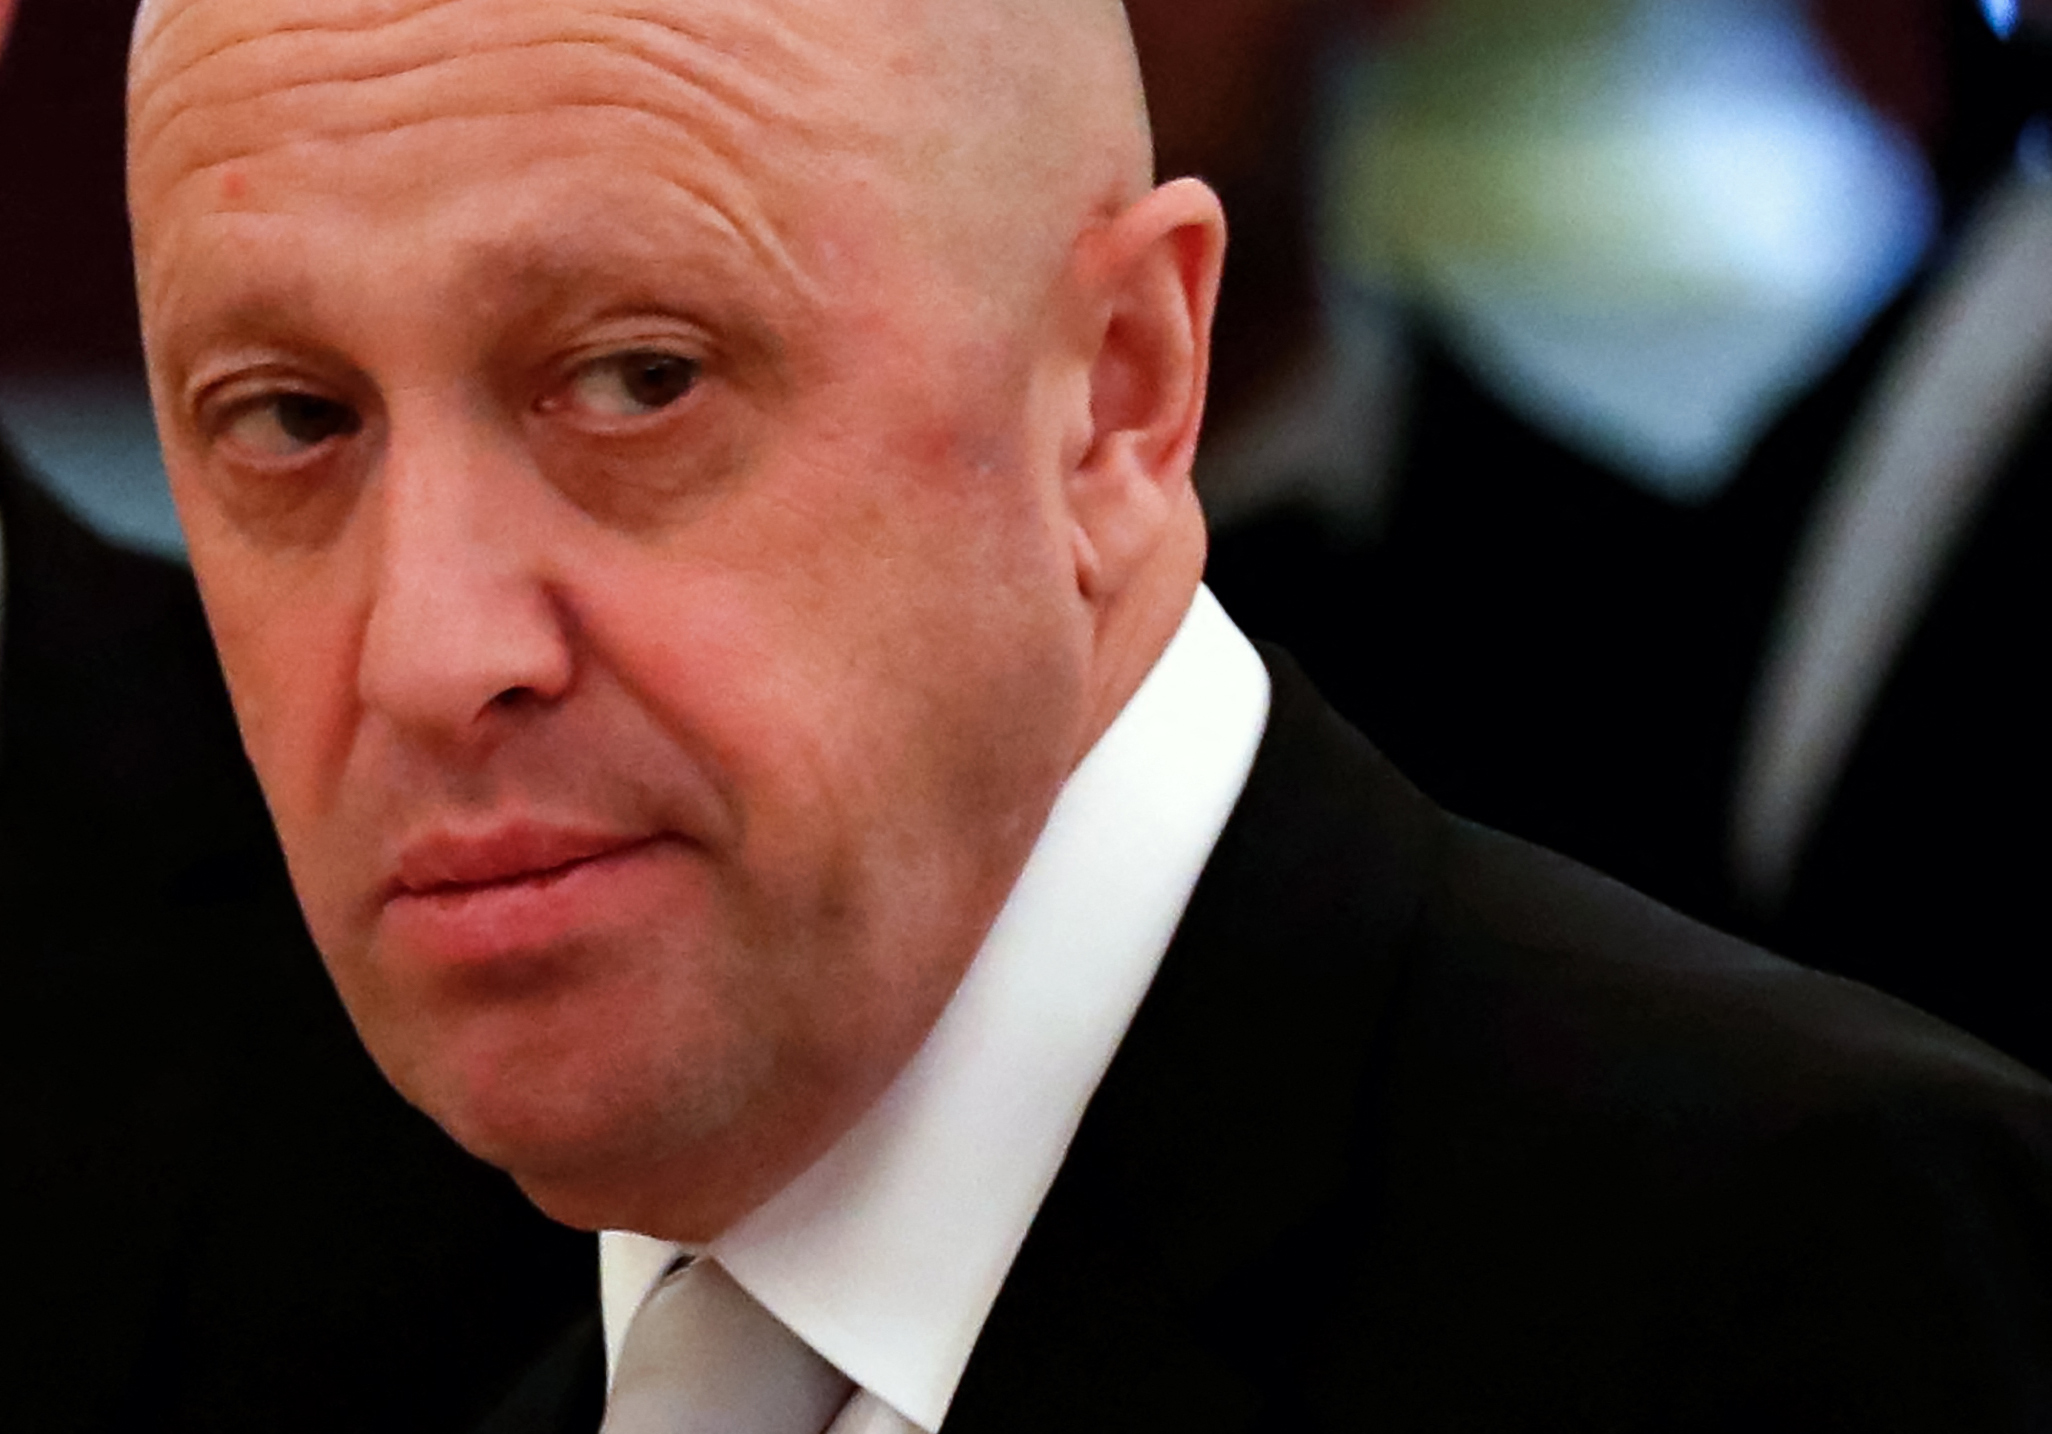 prigozhin-photo-may-offer-clue-to-his-whereabouts-newsweek